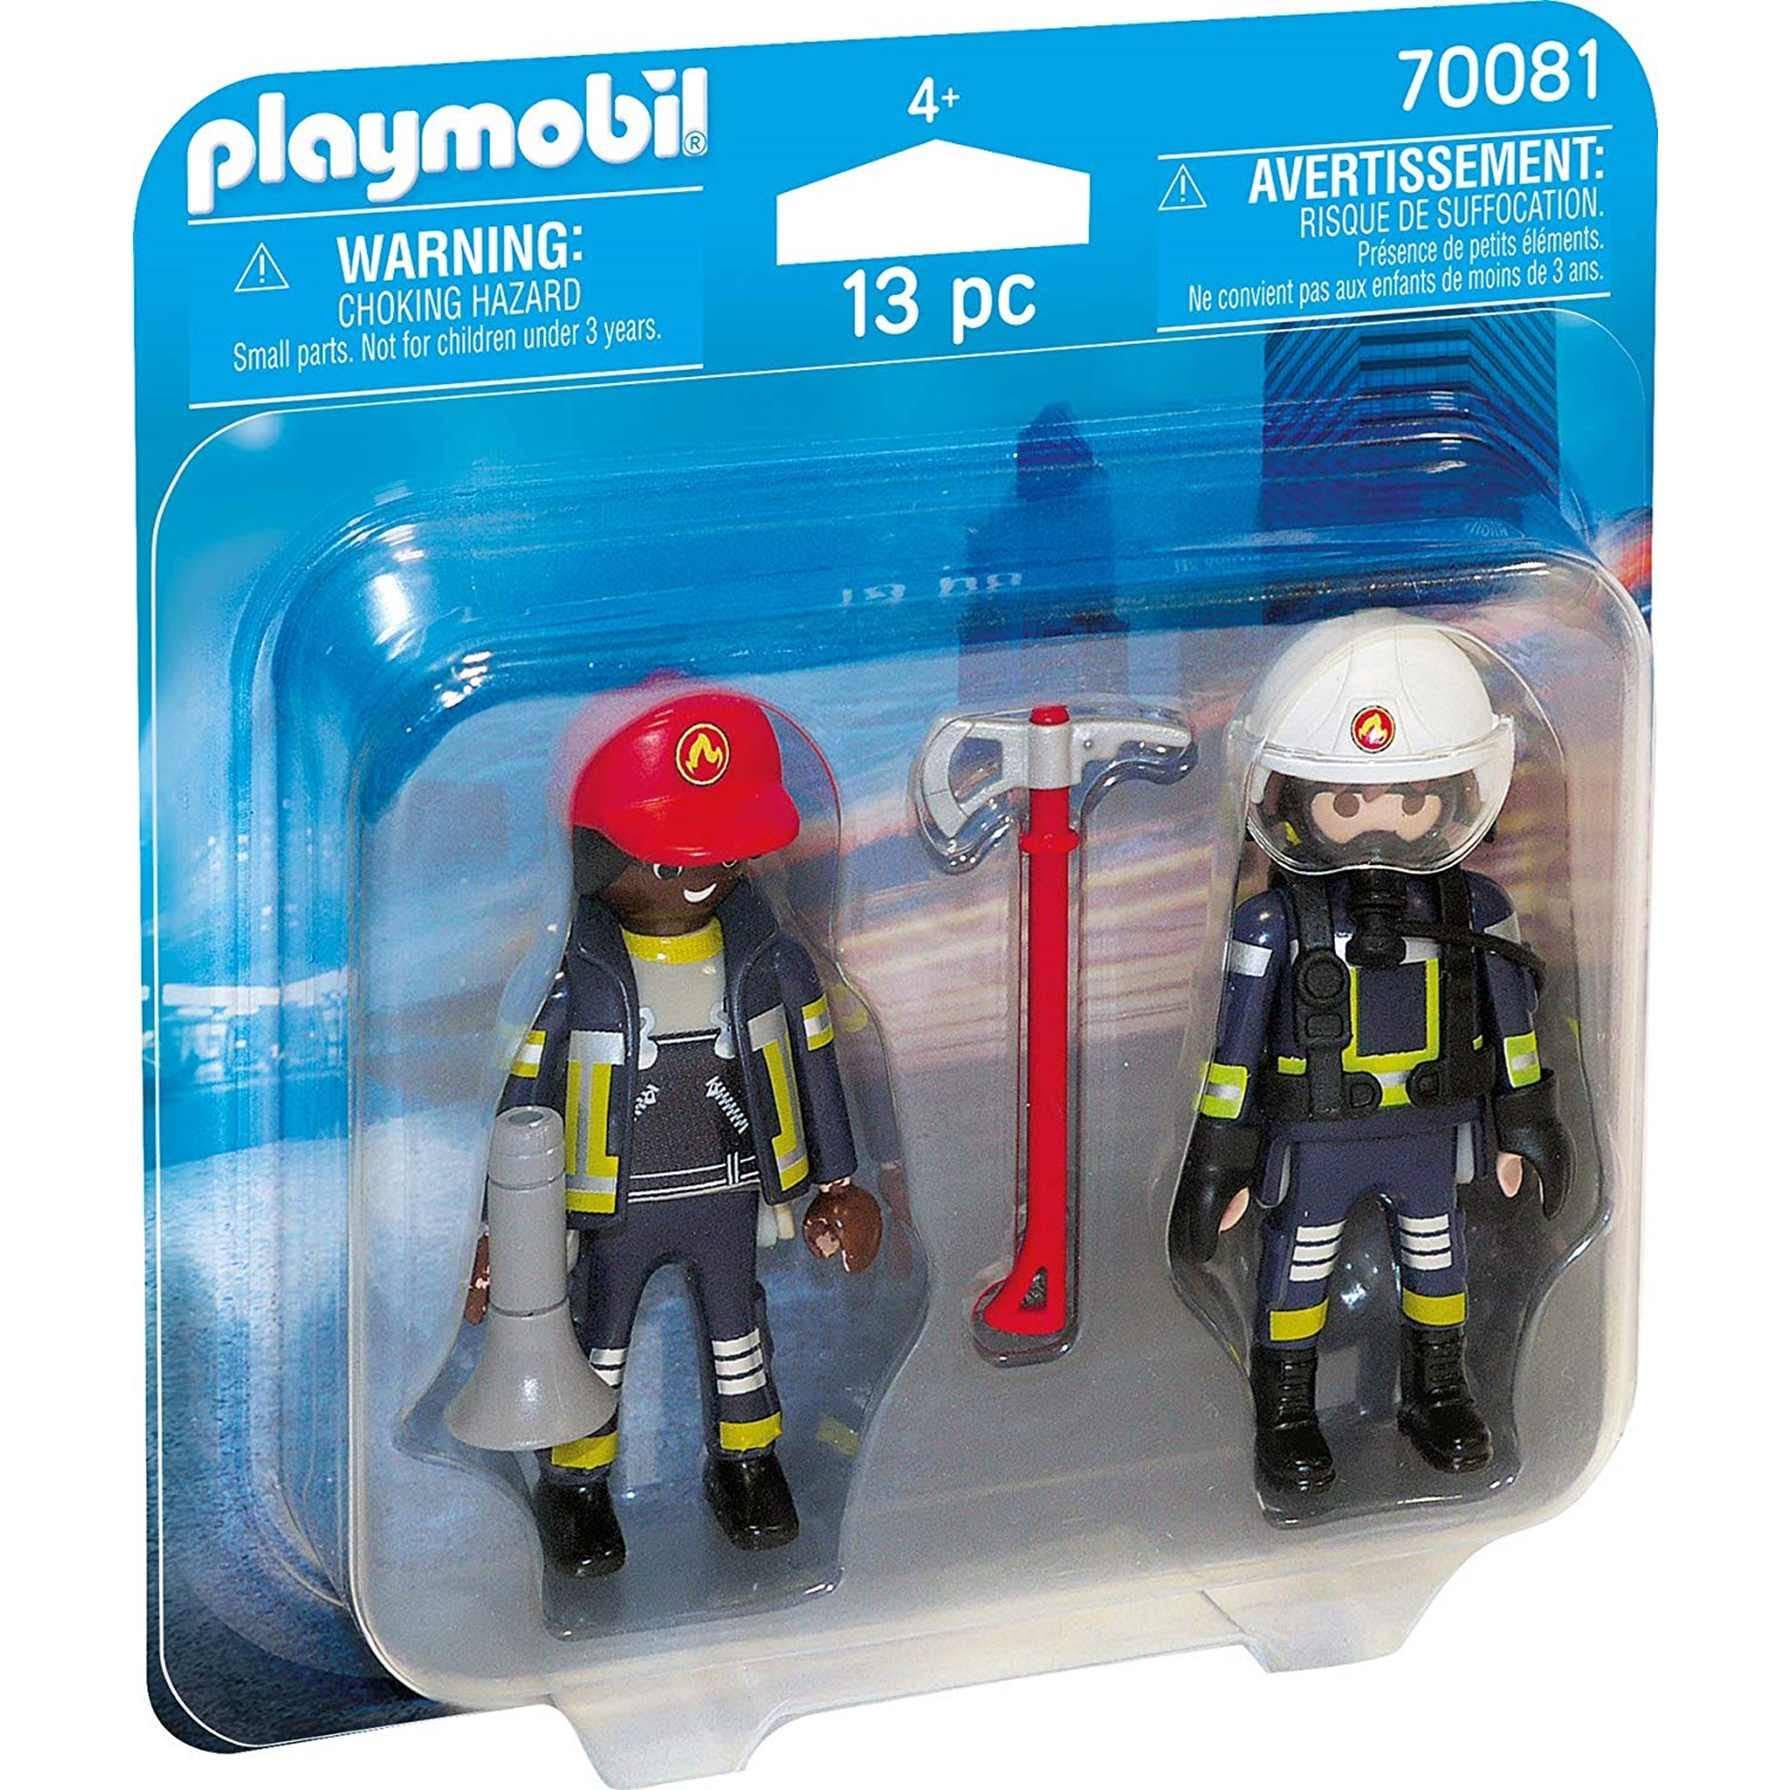 Playmobil 70081 - Rescue Firefighters